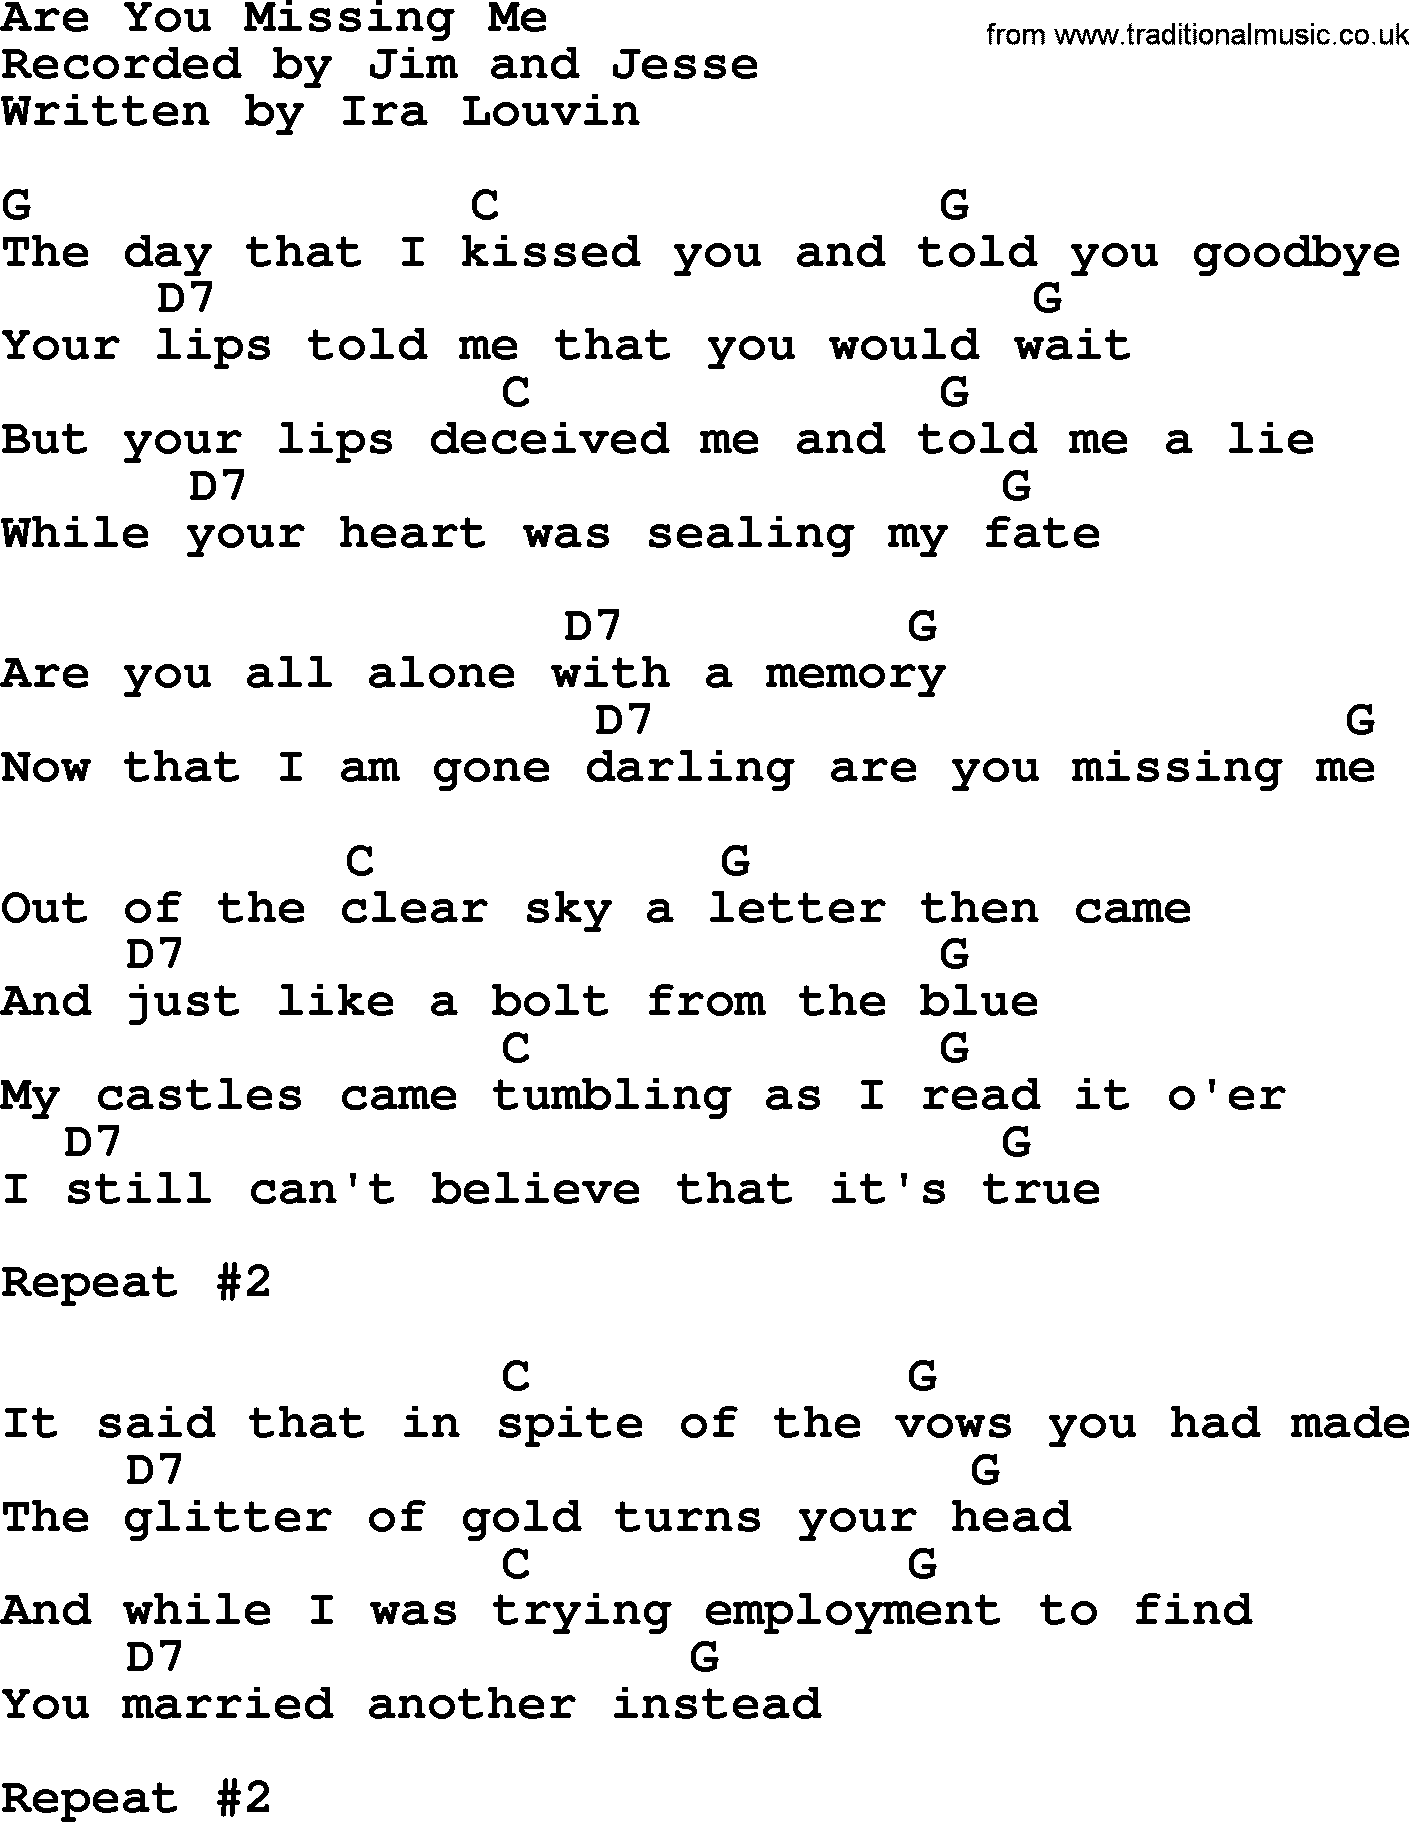 Bluegrass song: Are You Missing Me, lyrics and chords